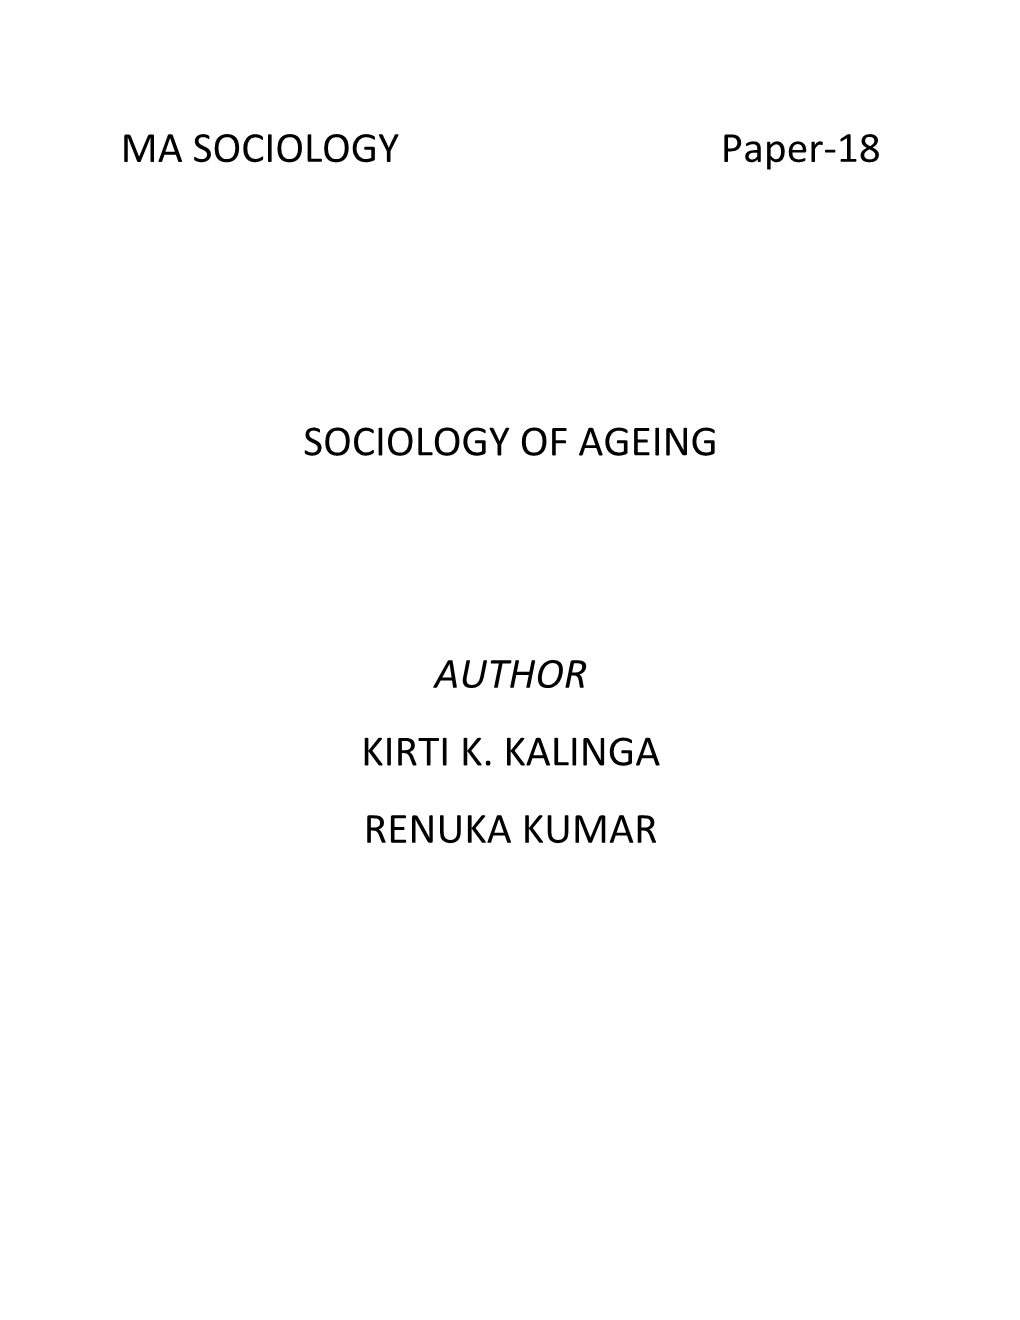 Paper-18 Sociology of Ageing